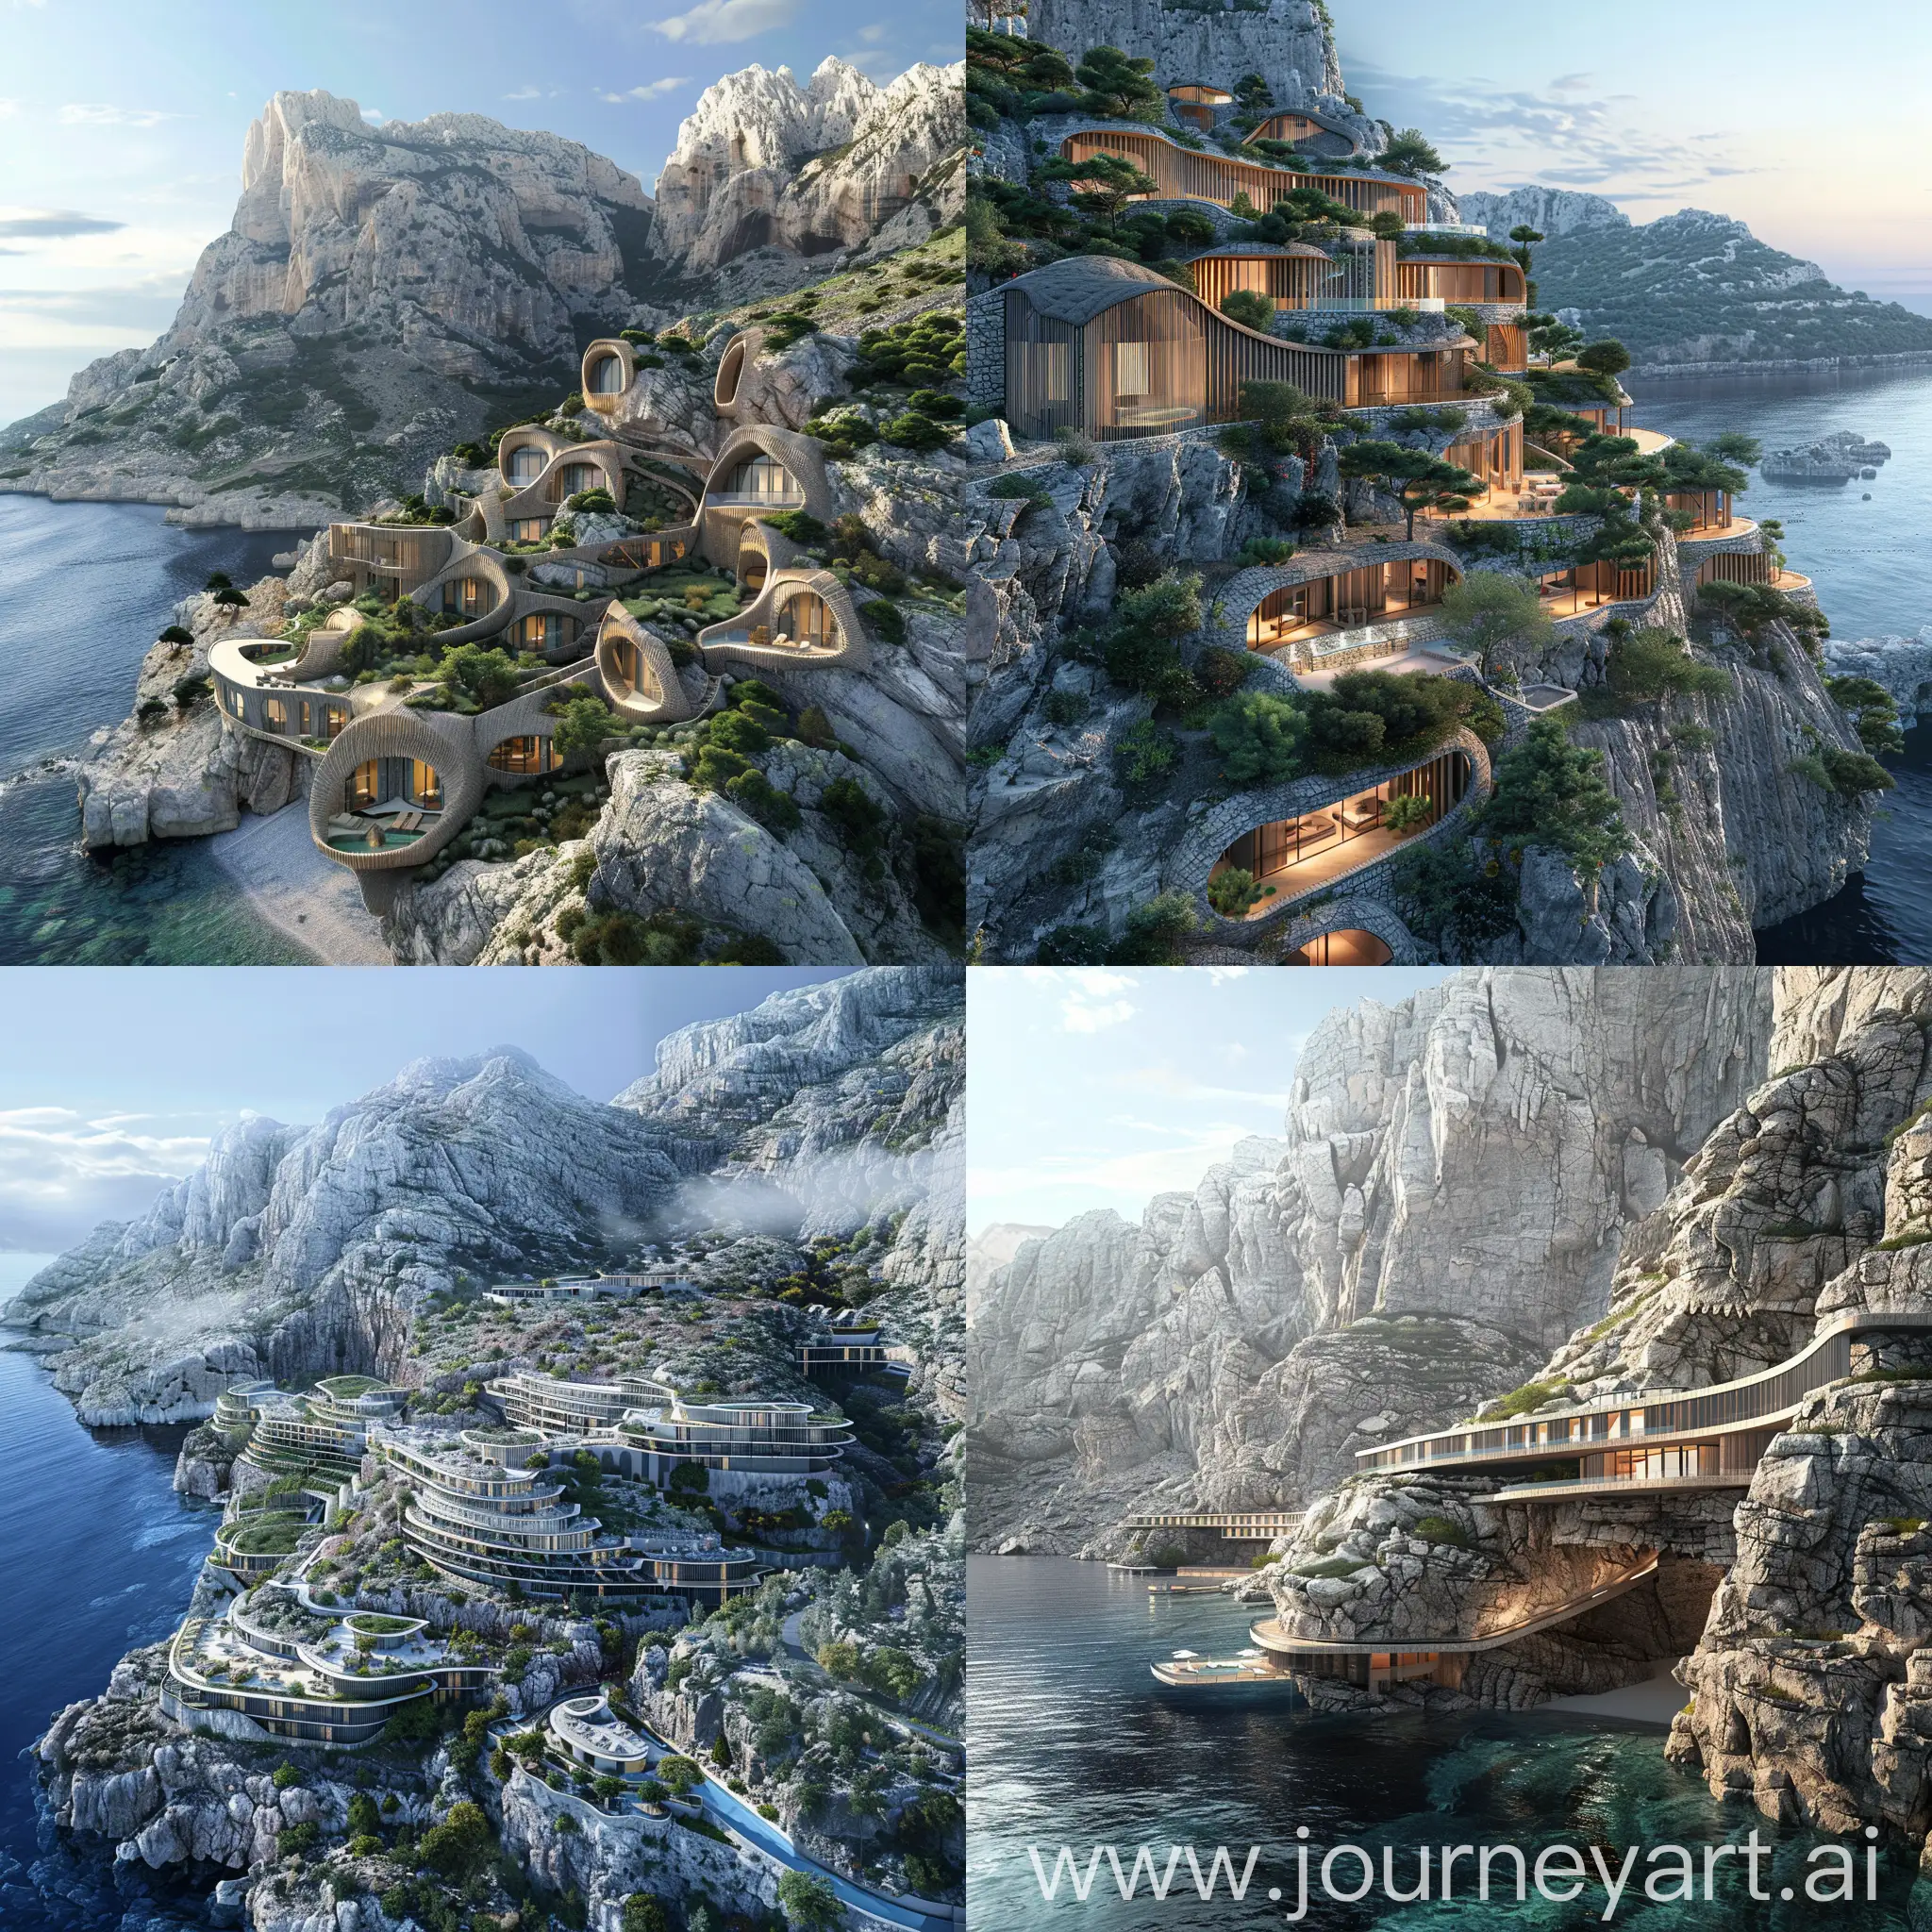 design a hotel in the mountain with 150 rooms and the mountain is surrounded by the sea from all sides